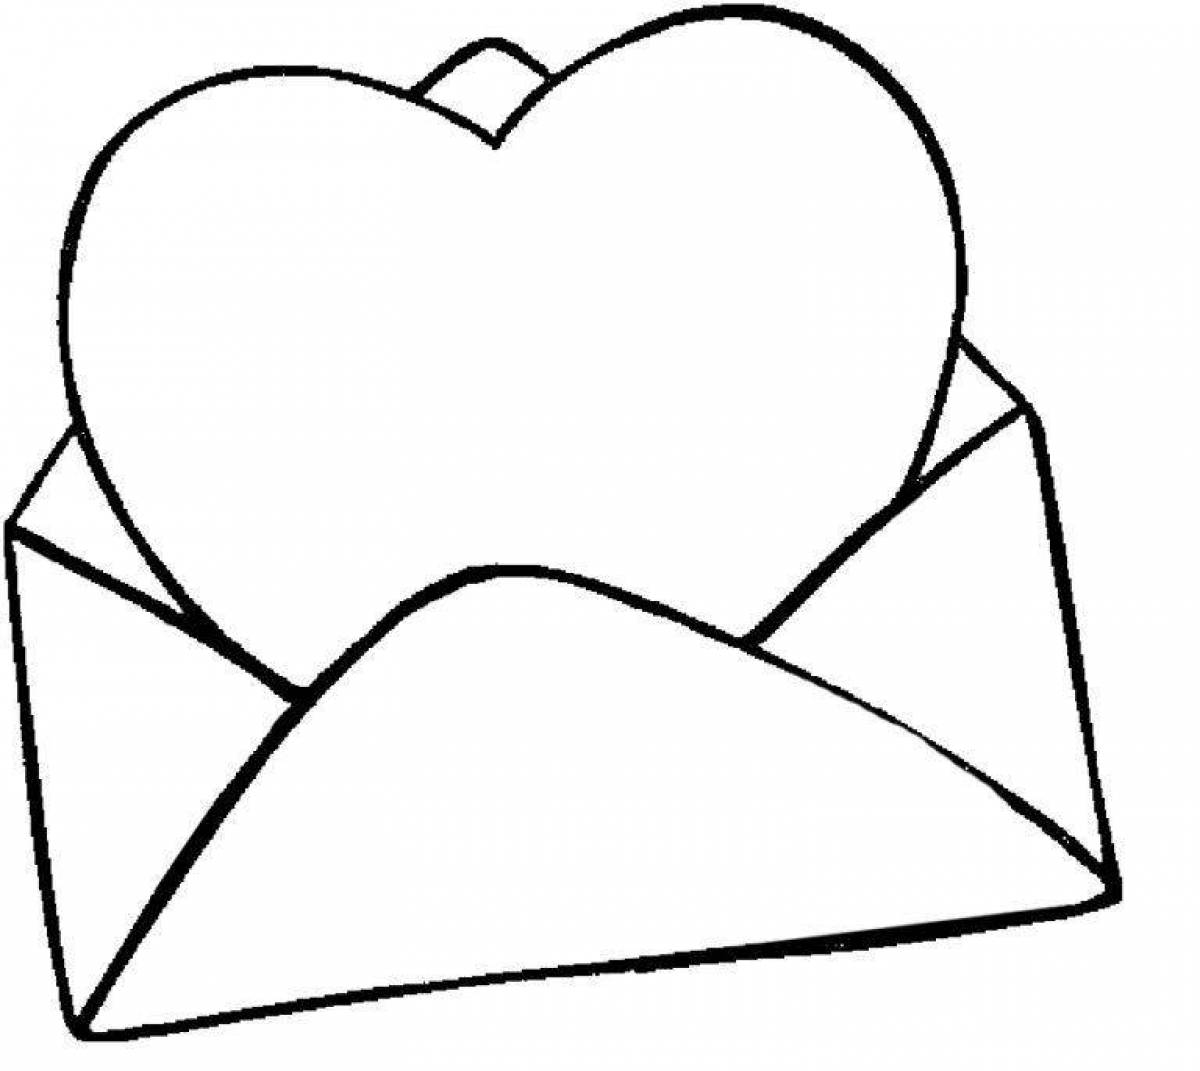 Bright envelope coloring page